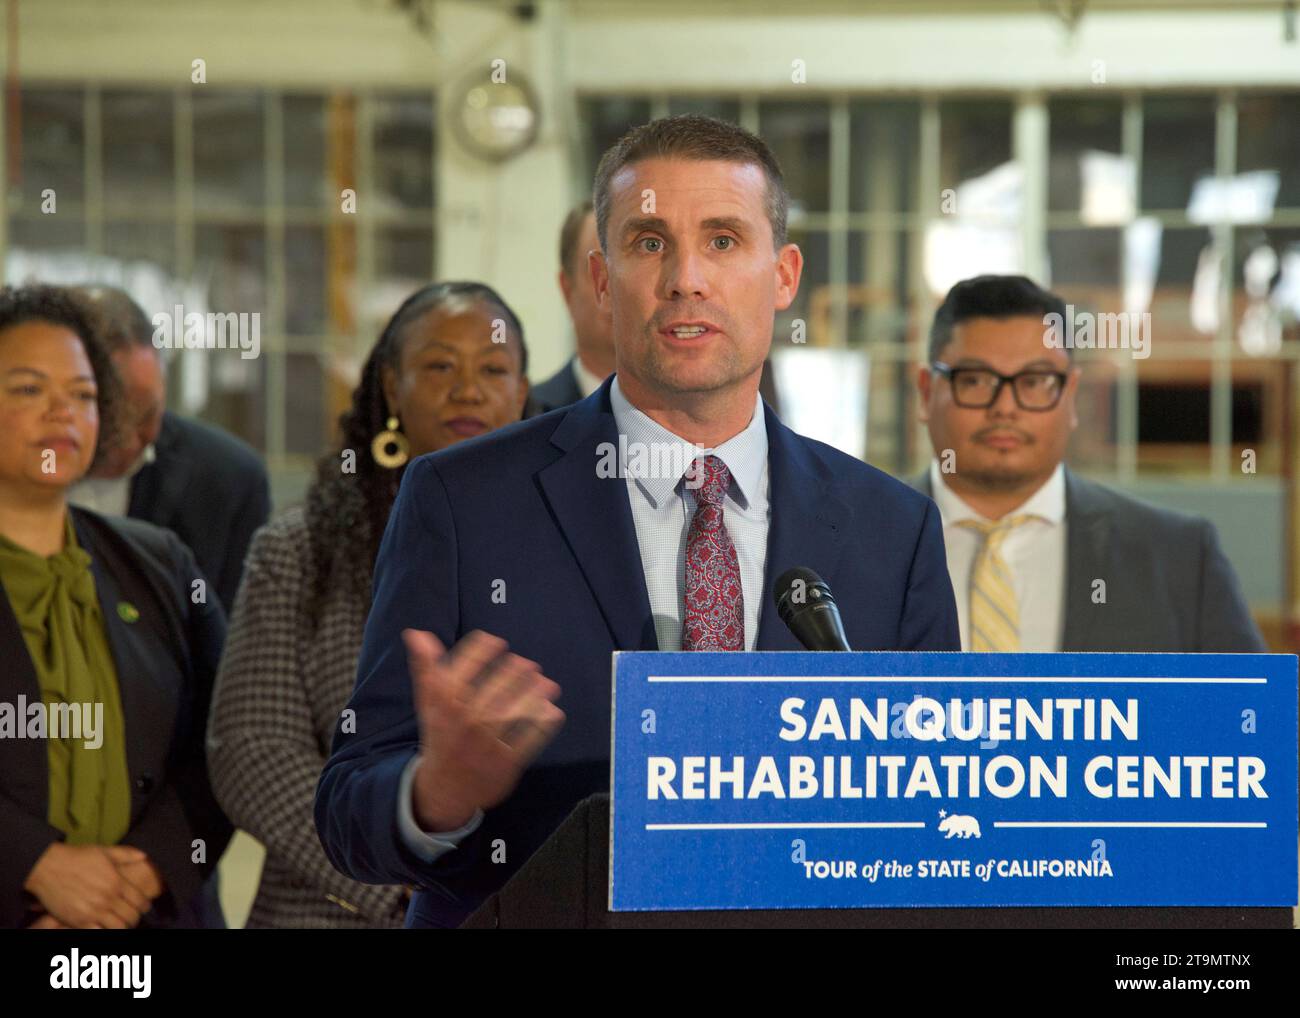 San Quentin, CA - March 17, 2023: Senator Mike McGuire , speaking at a press conf at San Quentin State Prison with Governor Newsom. Stock Photo